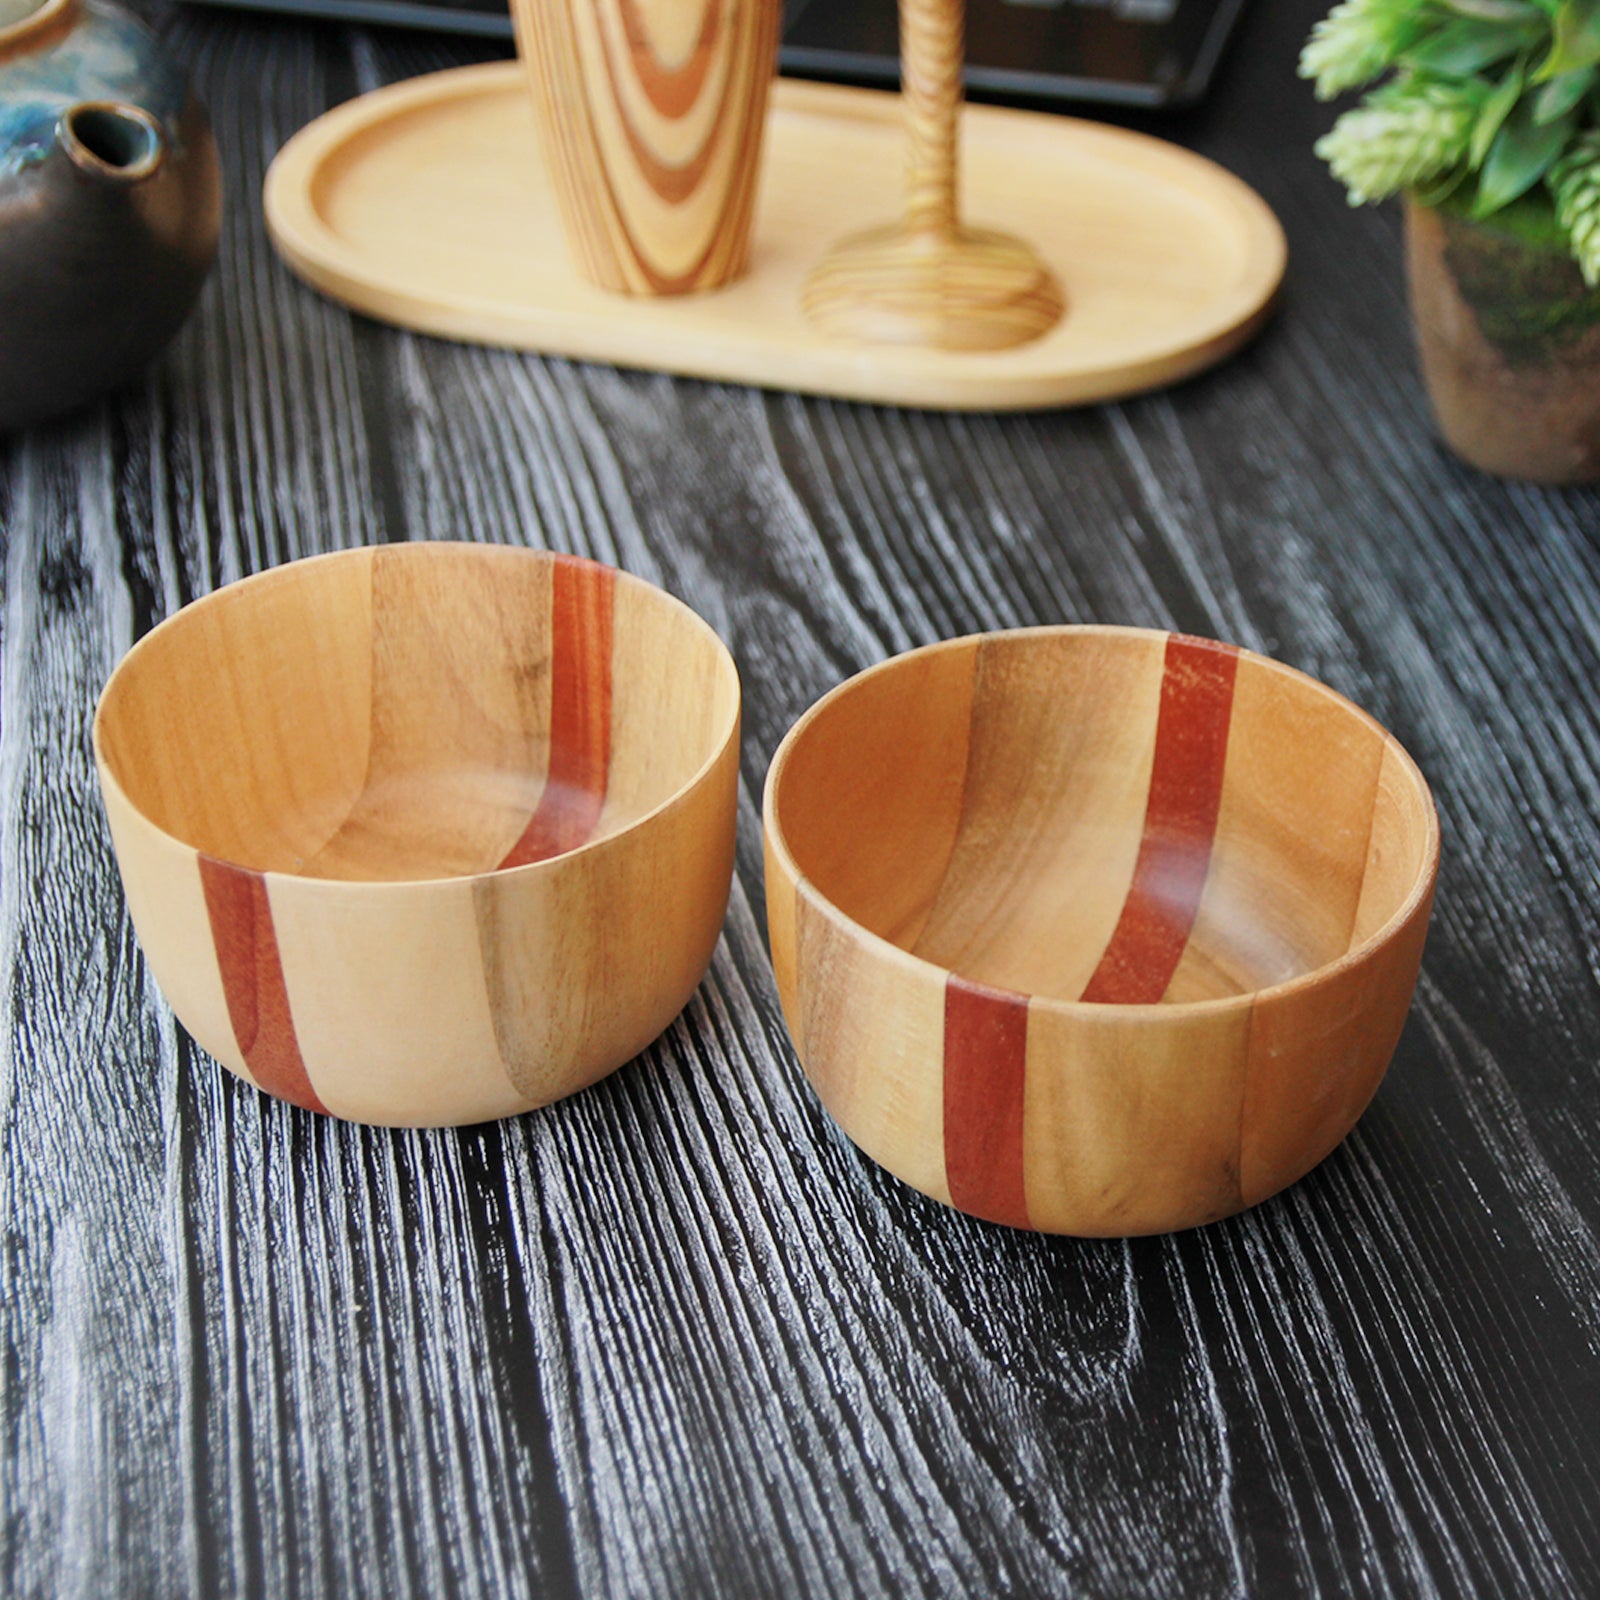 Two wooden handmade bowls in birchwood with a black sirish wood accent.